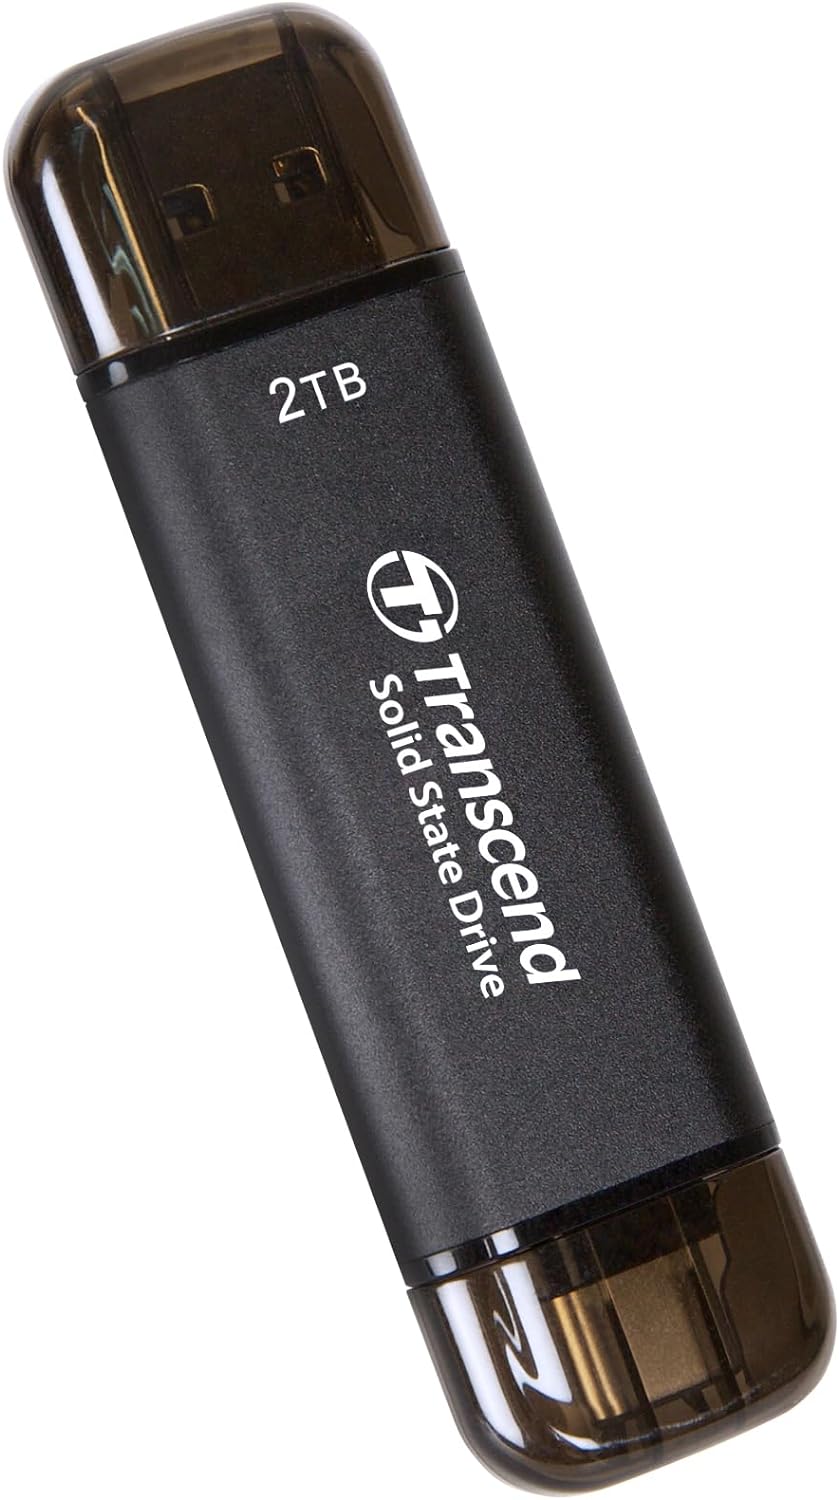 Transcend 2TB USB 10Gbps with Type-C and Type-A Portable SSD External Hard Drive (Brand New)